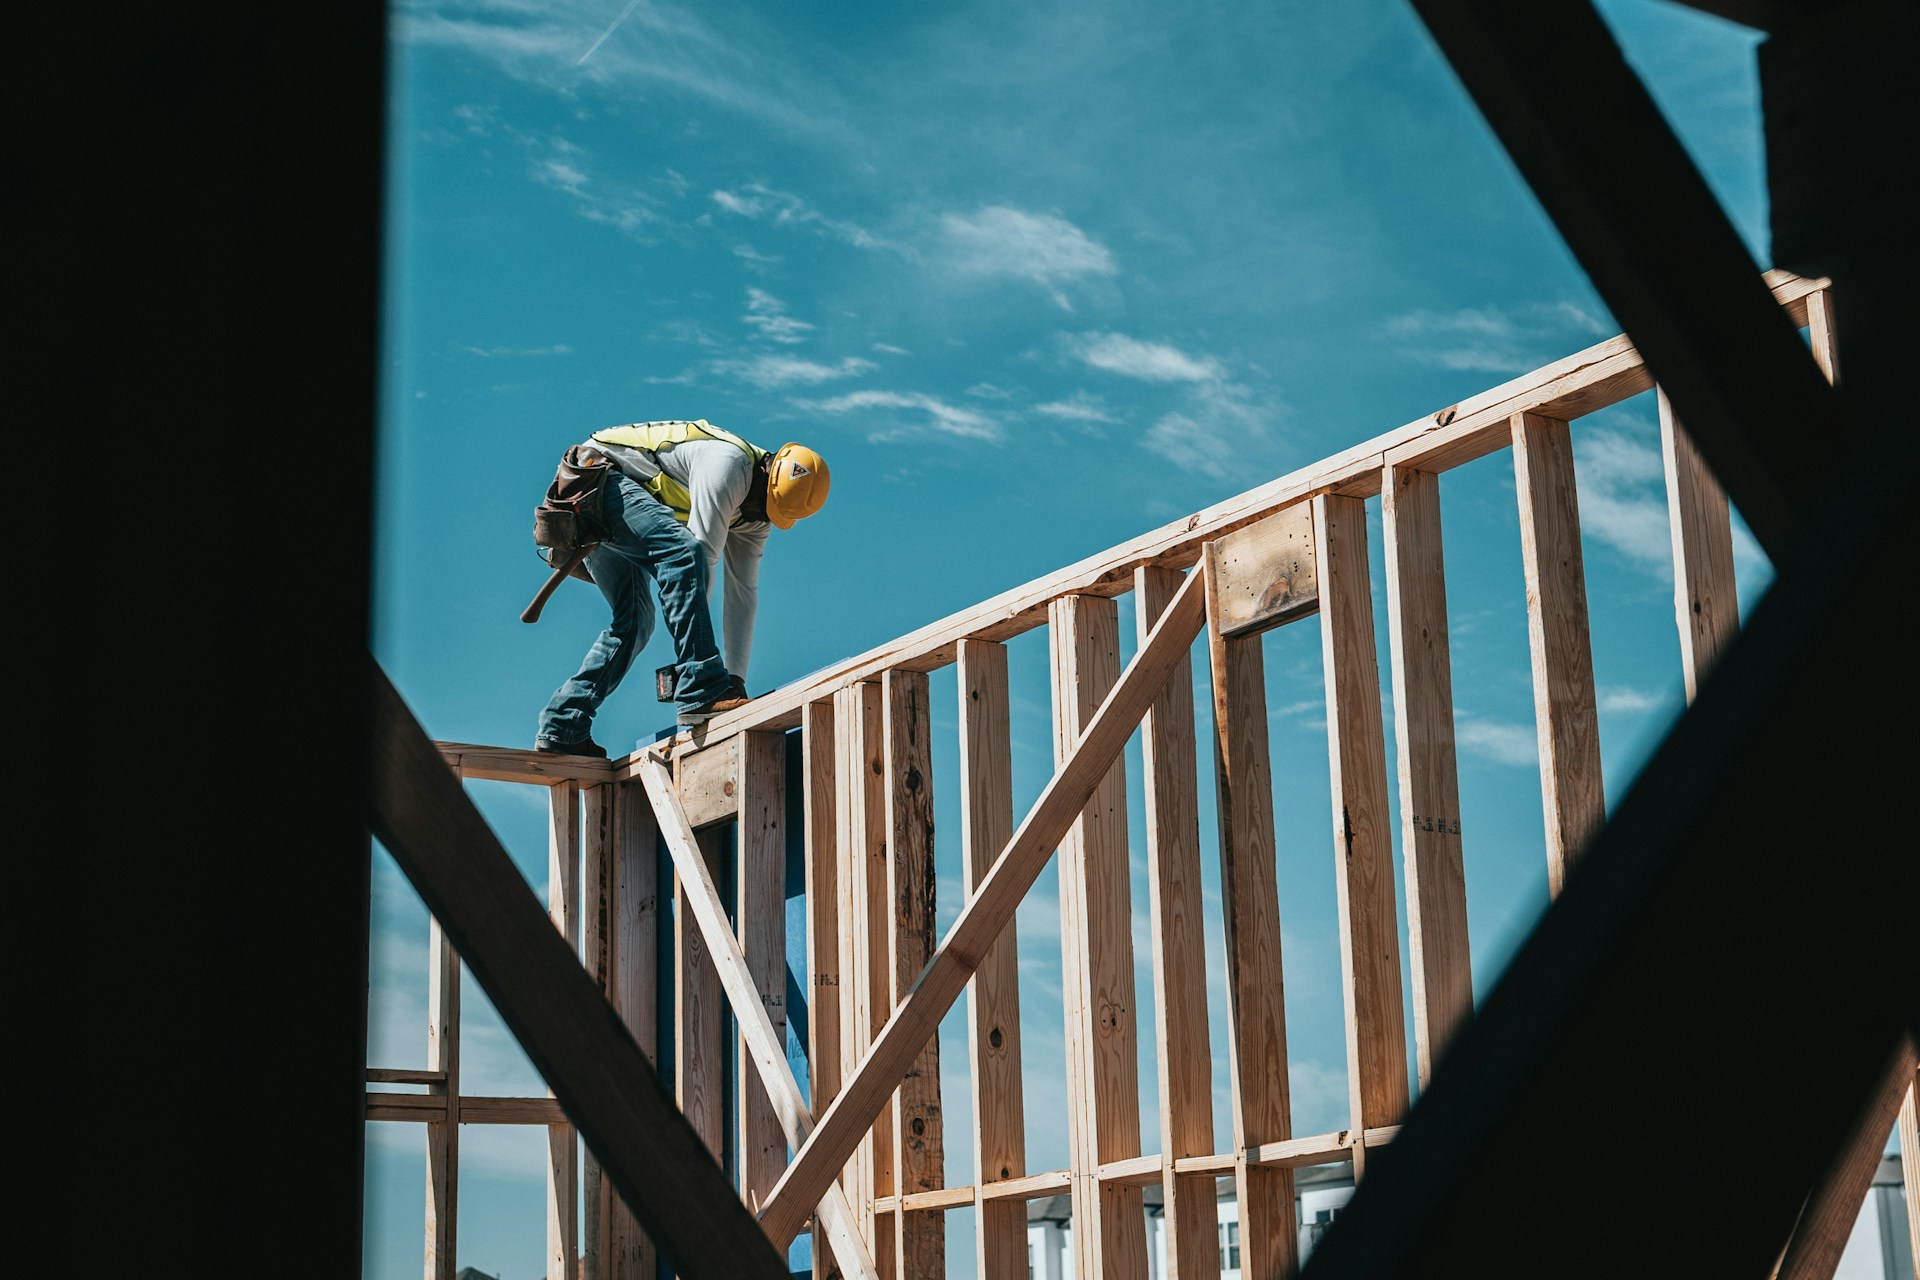 Person working on framing a house. Photo by Josh Olalde on Unsplash